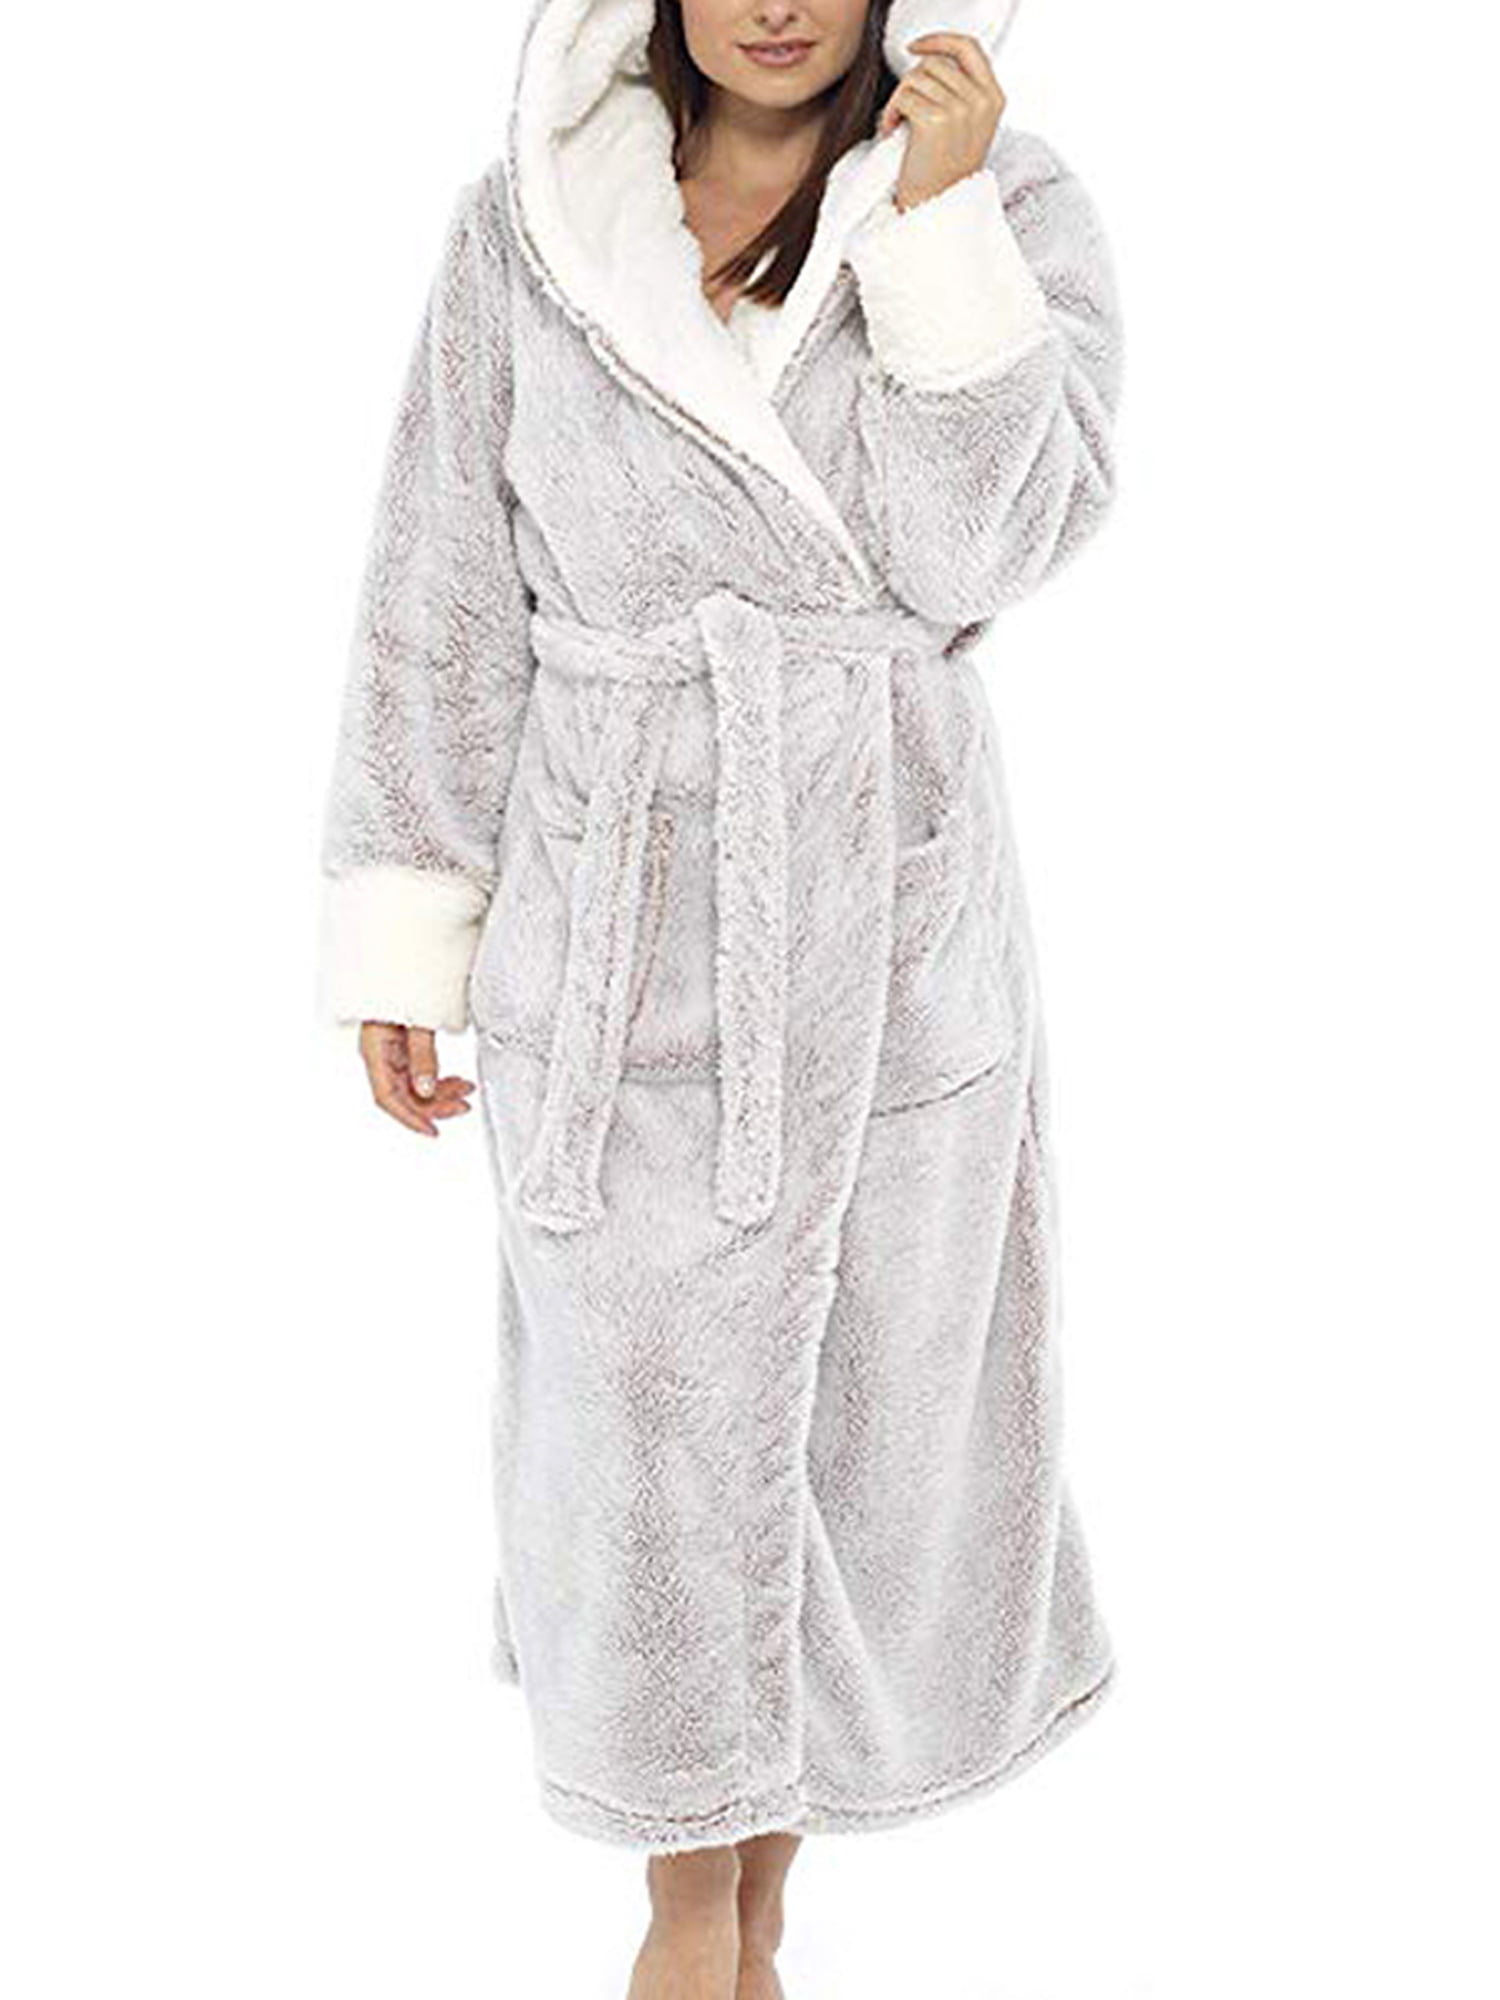 Buy > dressing gown long fluffy > in stock